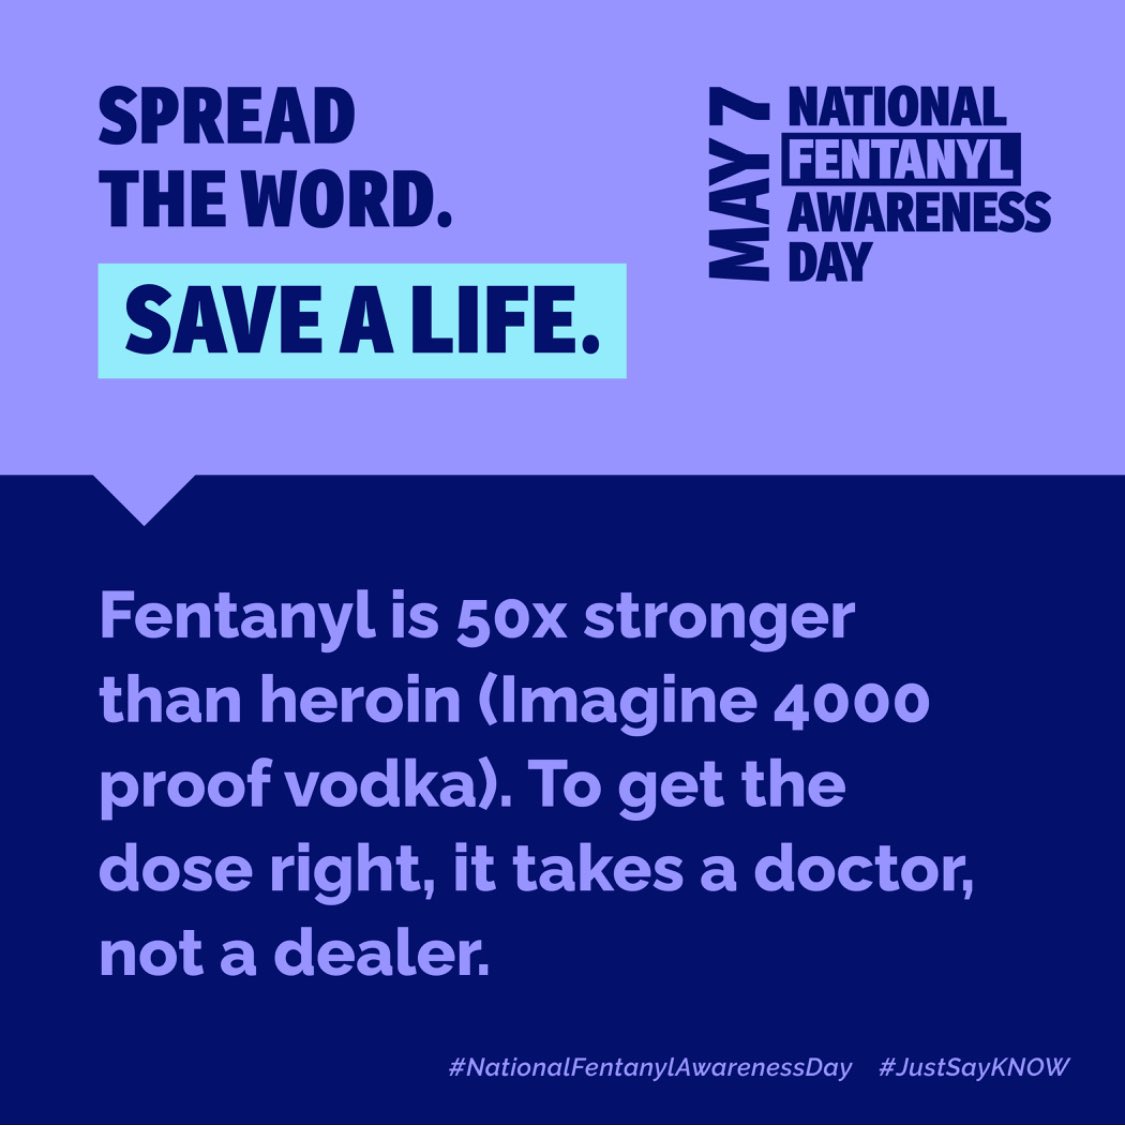 Fentanyl is 50x stronger than heroin and present in many illegal drugs (pills and powders) teens might come across. Most kids don’t understand the dangers of fentanyl. Spread the word and find more resources at fentanylawarenessday.org. #justsayKNOW #NationalFentanylAwarenessDay